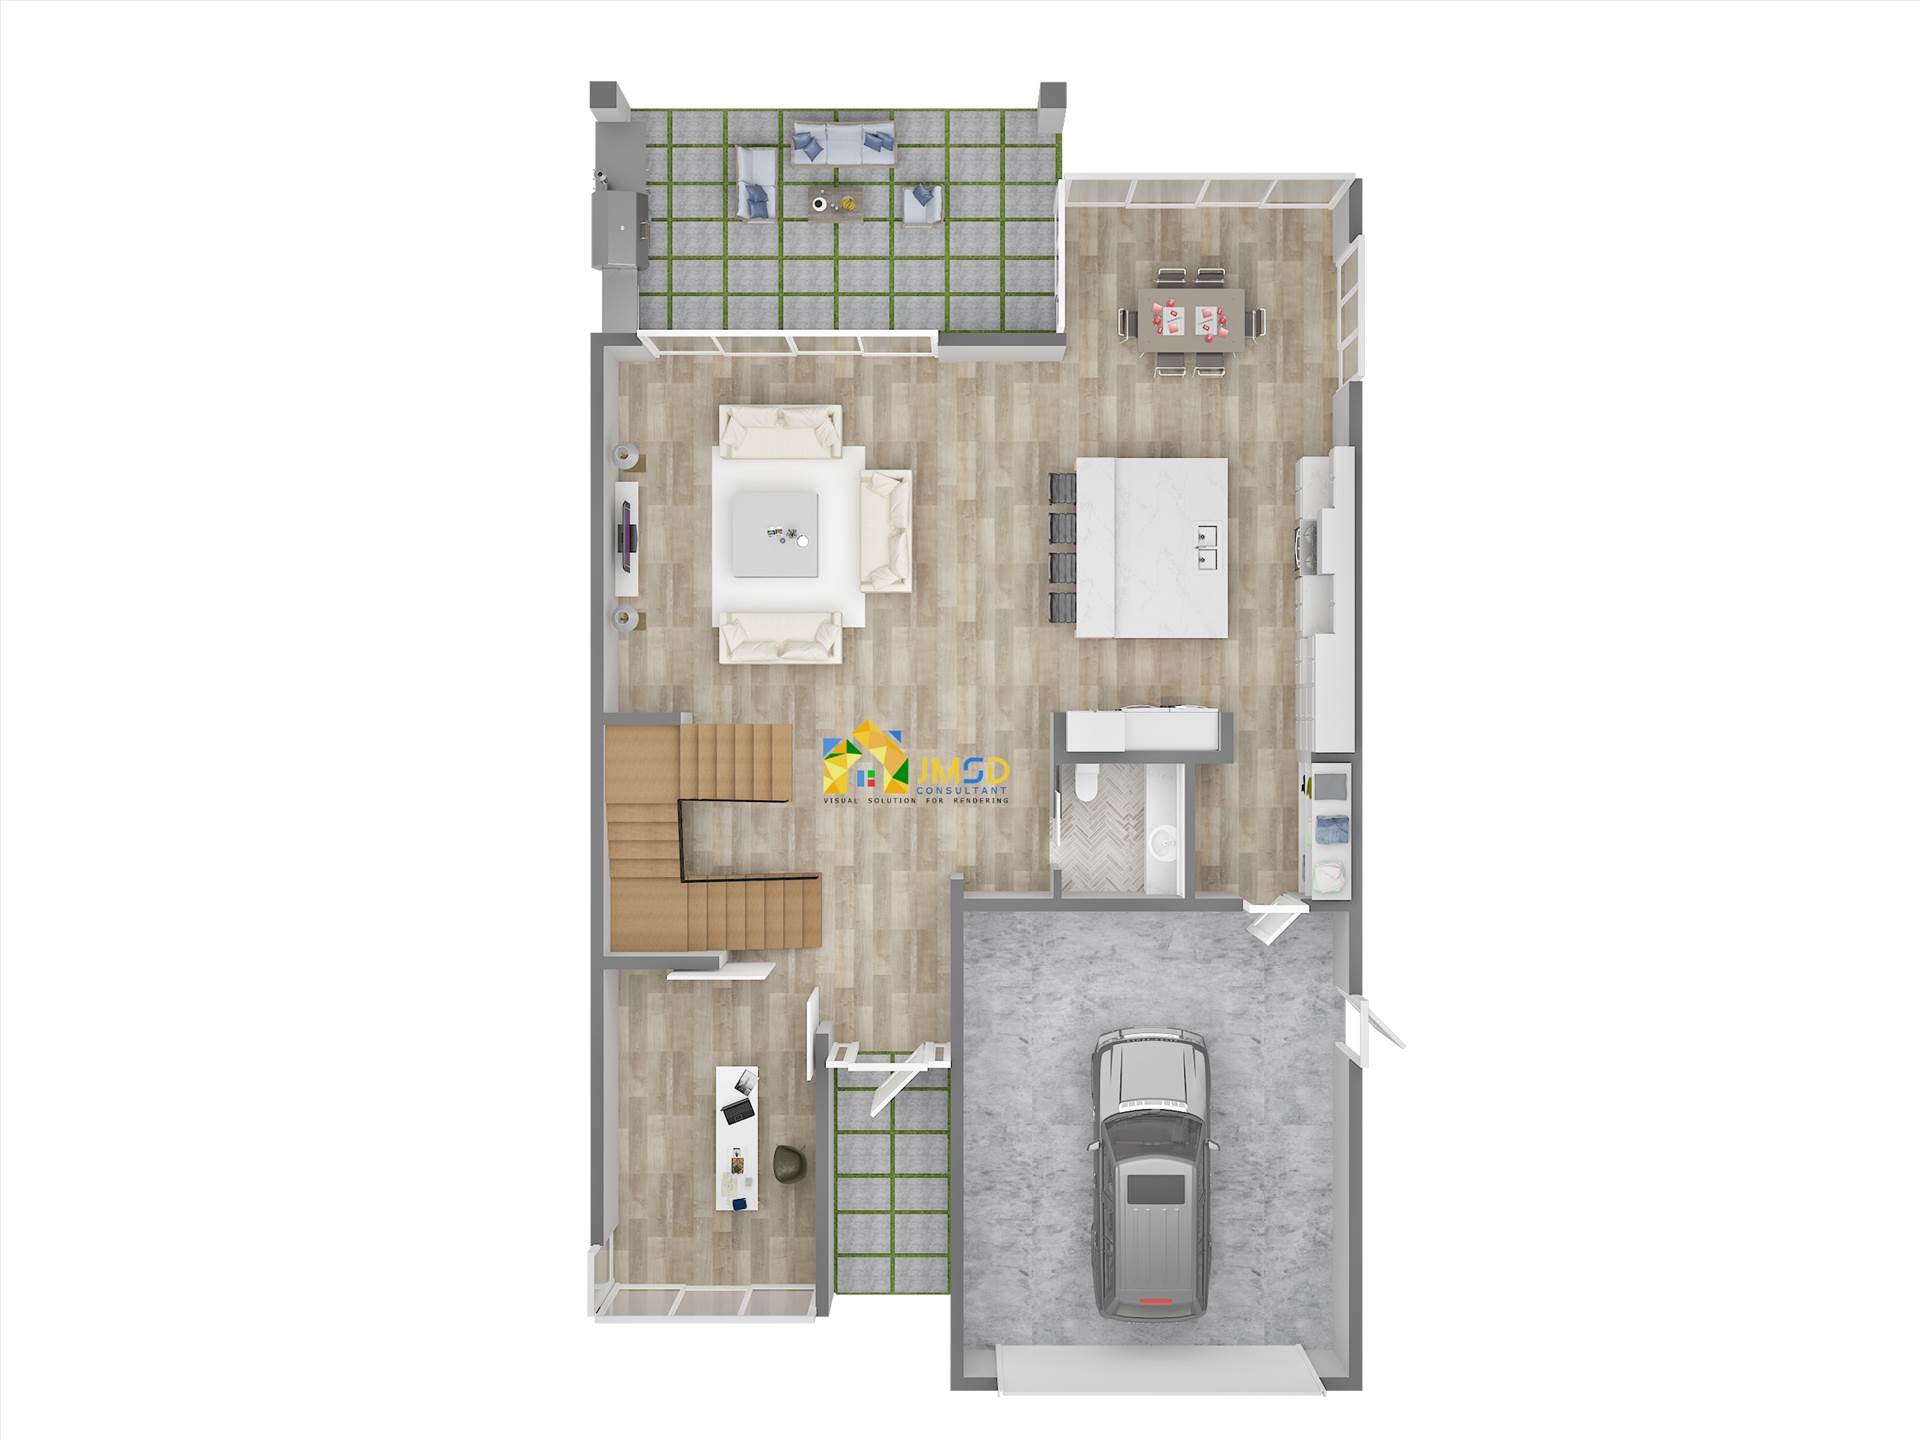 3D Floor Plan Rendering Services 3D Floor Plan Rendering Services for a two story house.  Outsourcing Support of  3D Rendering Projects In order to contact JMSD Consultant by email, info@jsengineering.org.  by JMSDCONSULTANT